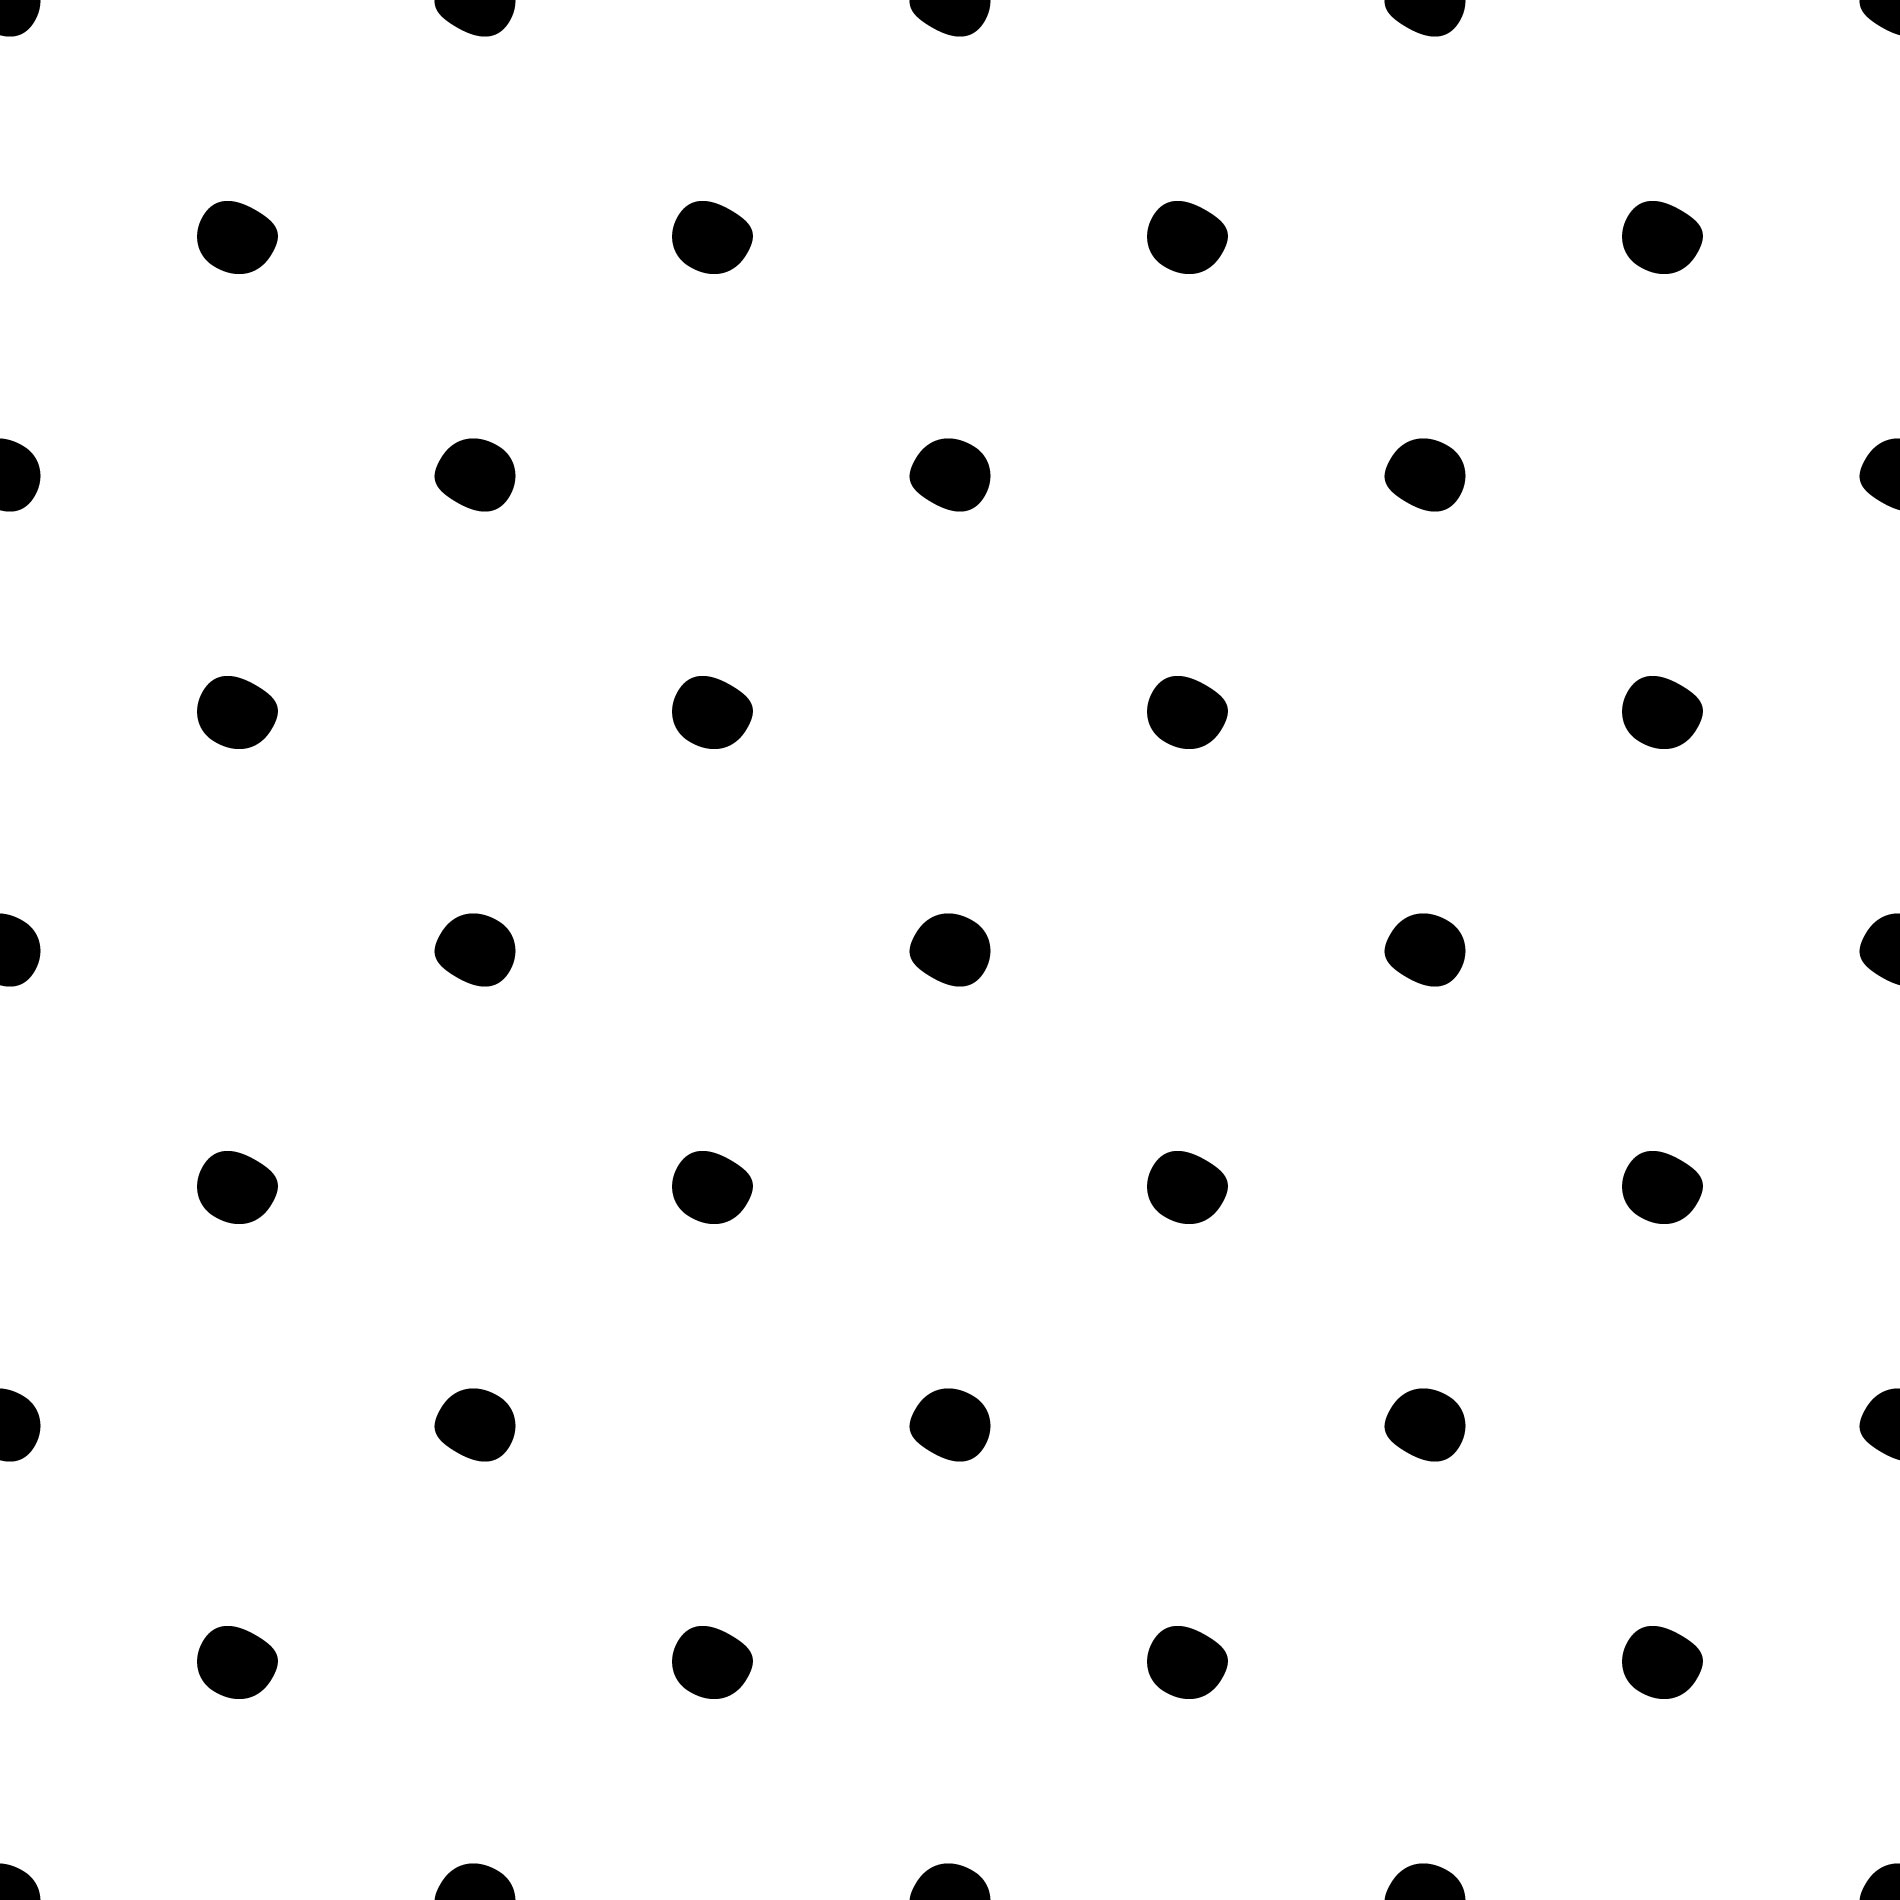 Minimalist polka dot wallpaper - Peel and Stick or Non-Pasted